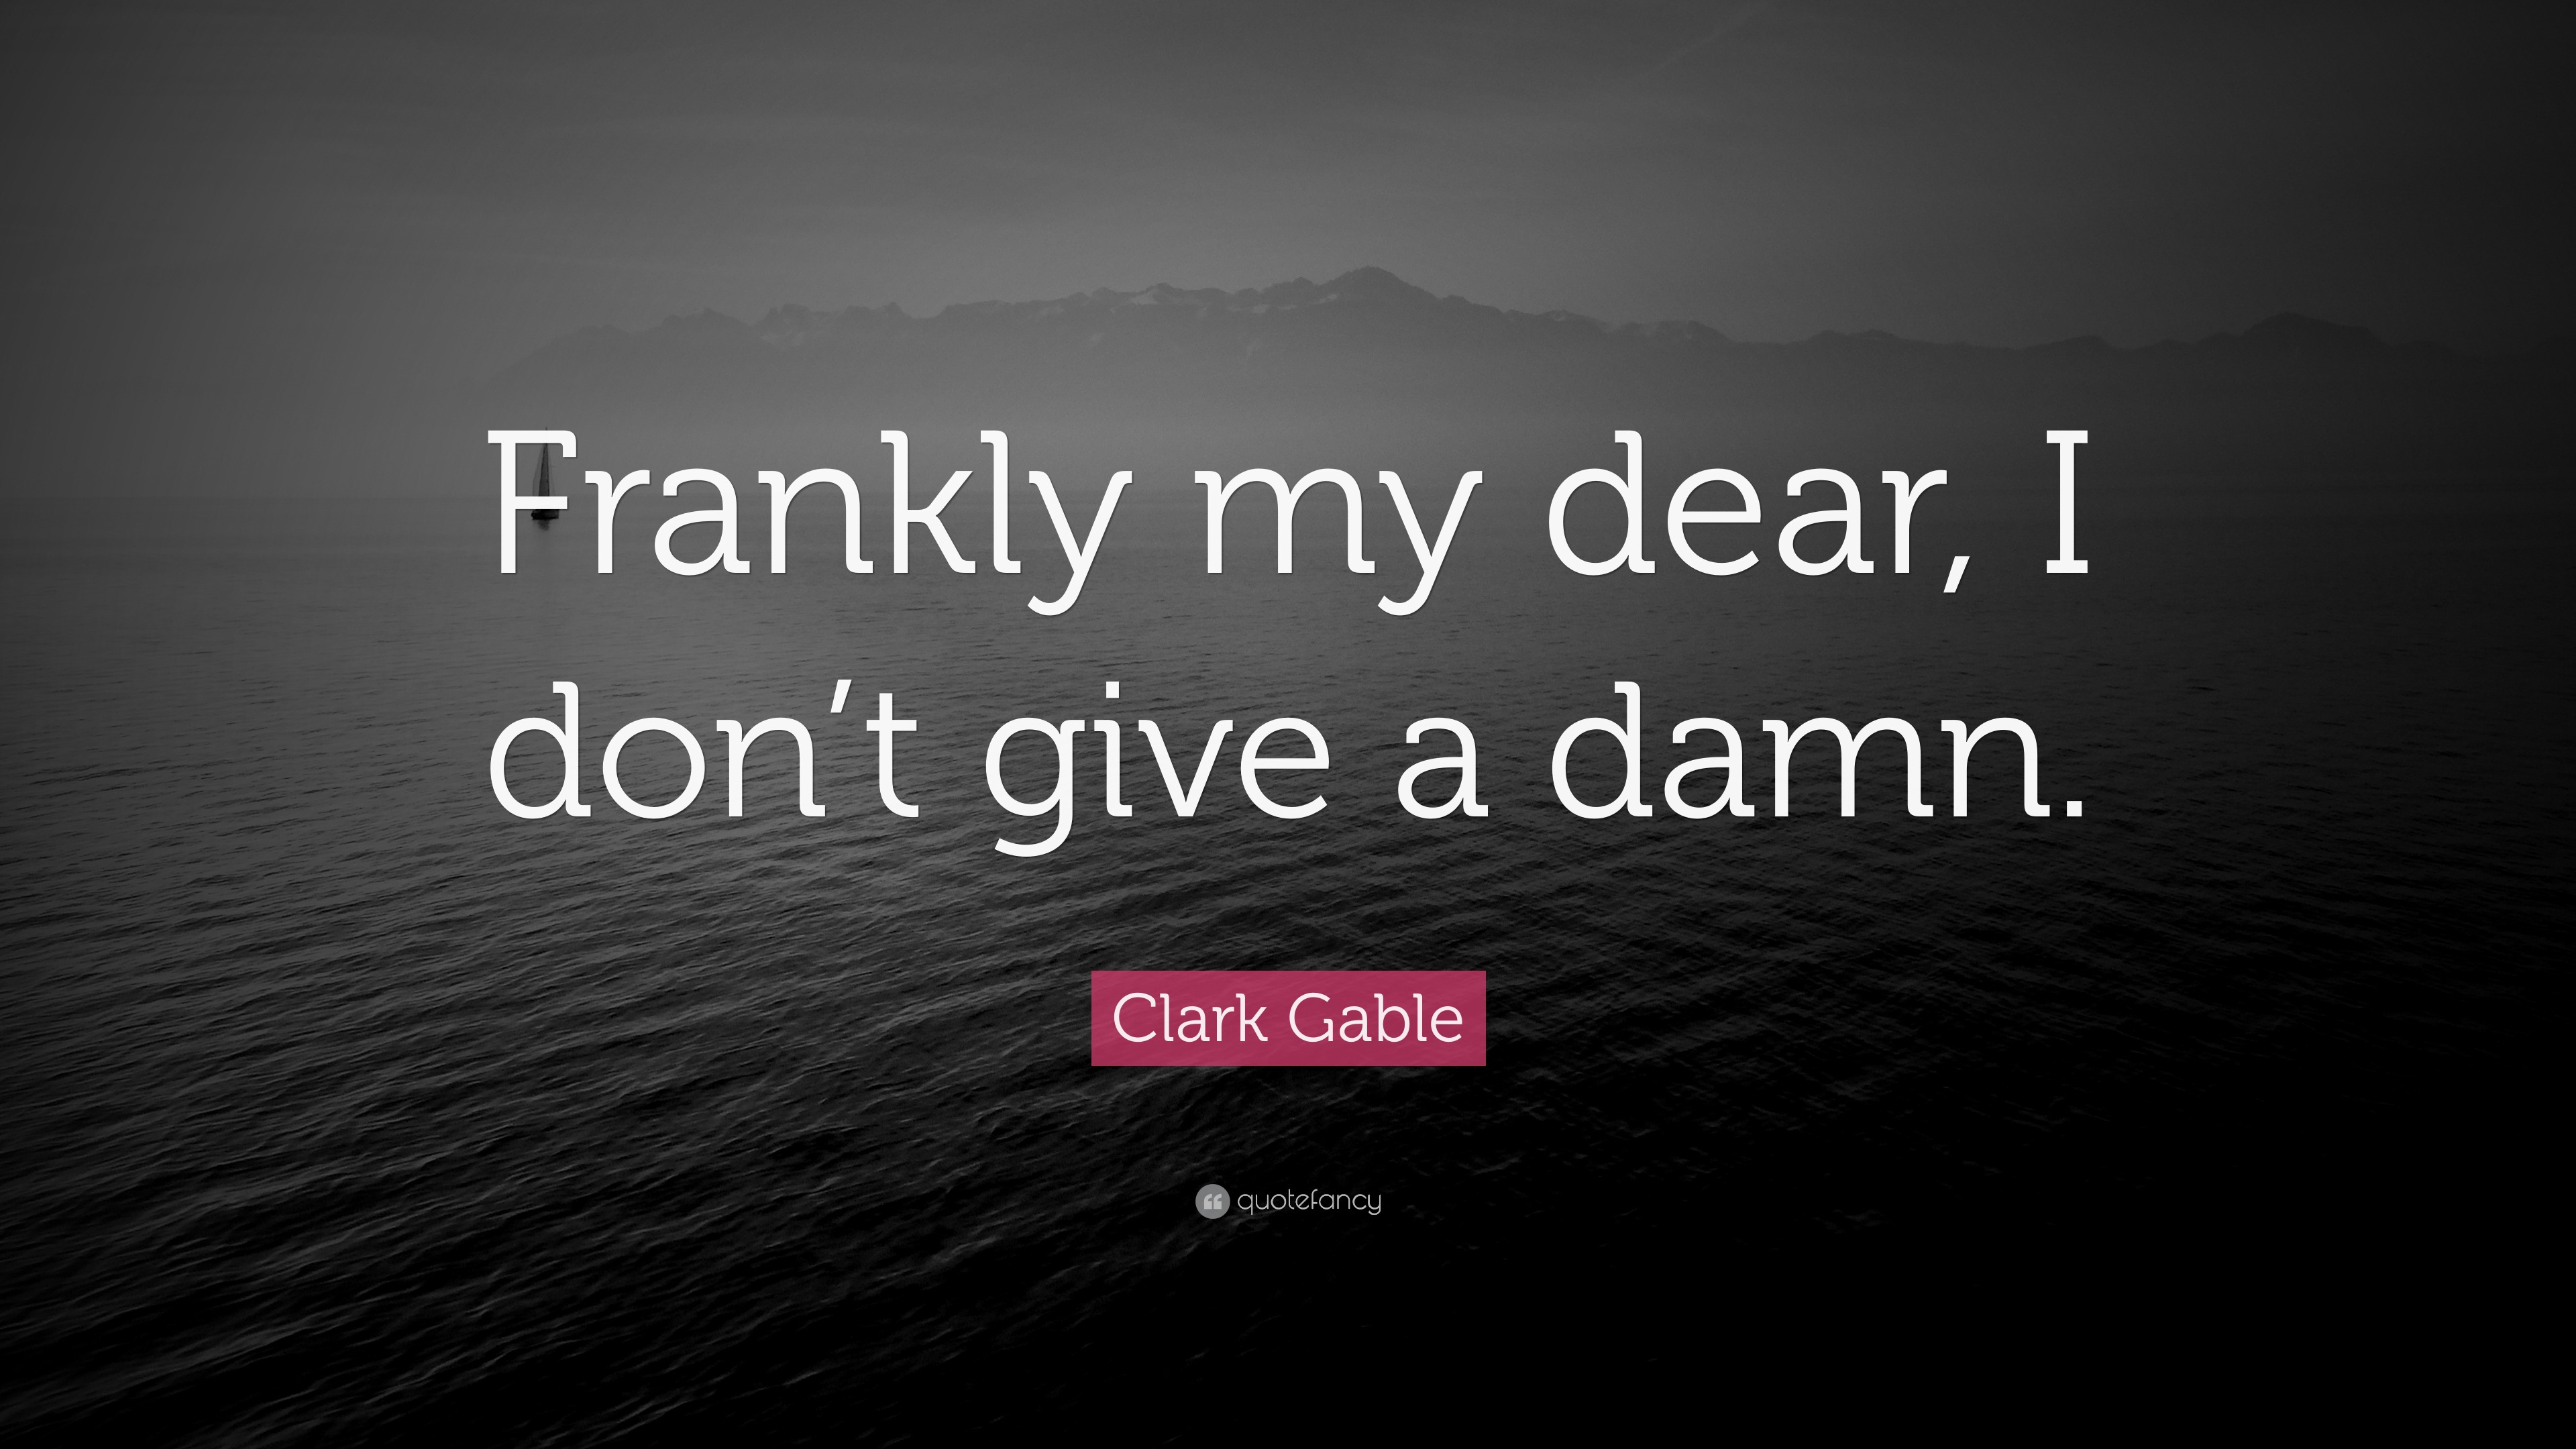 Clark Gable Quote “Frankly my dear I don’t give a damn.”